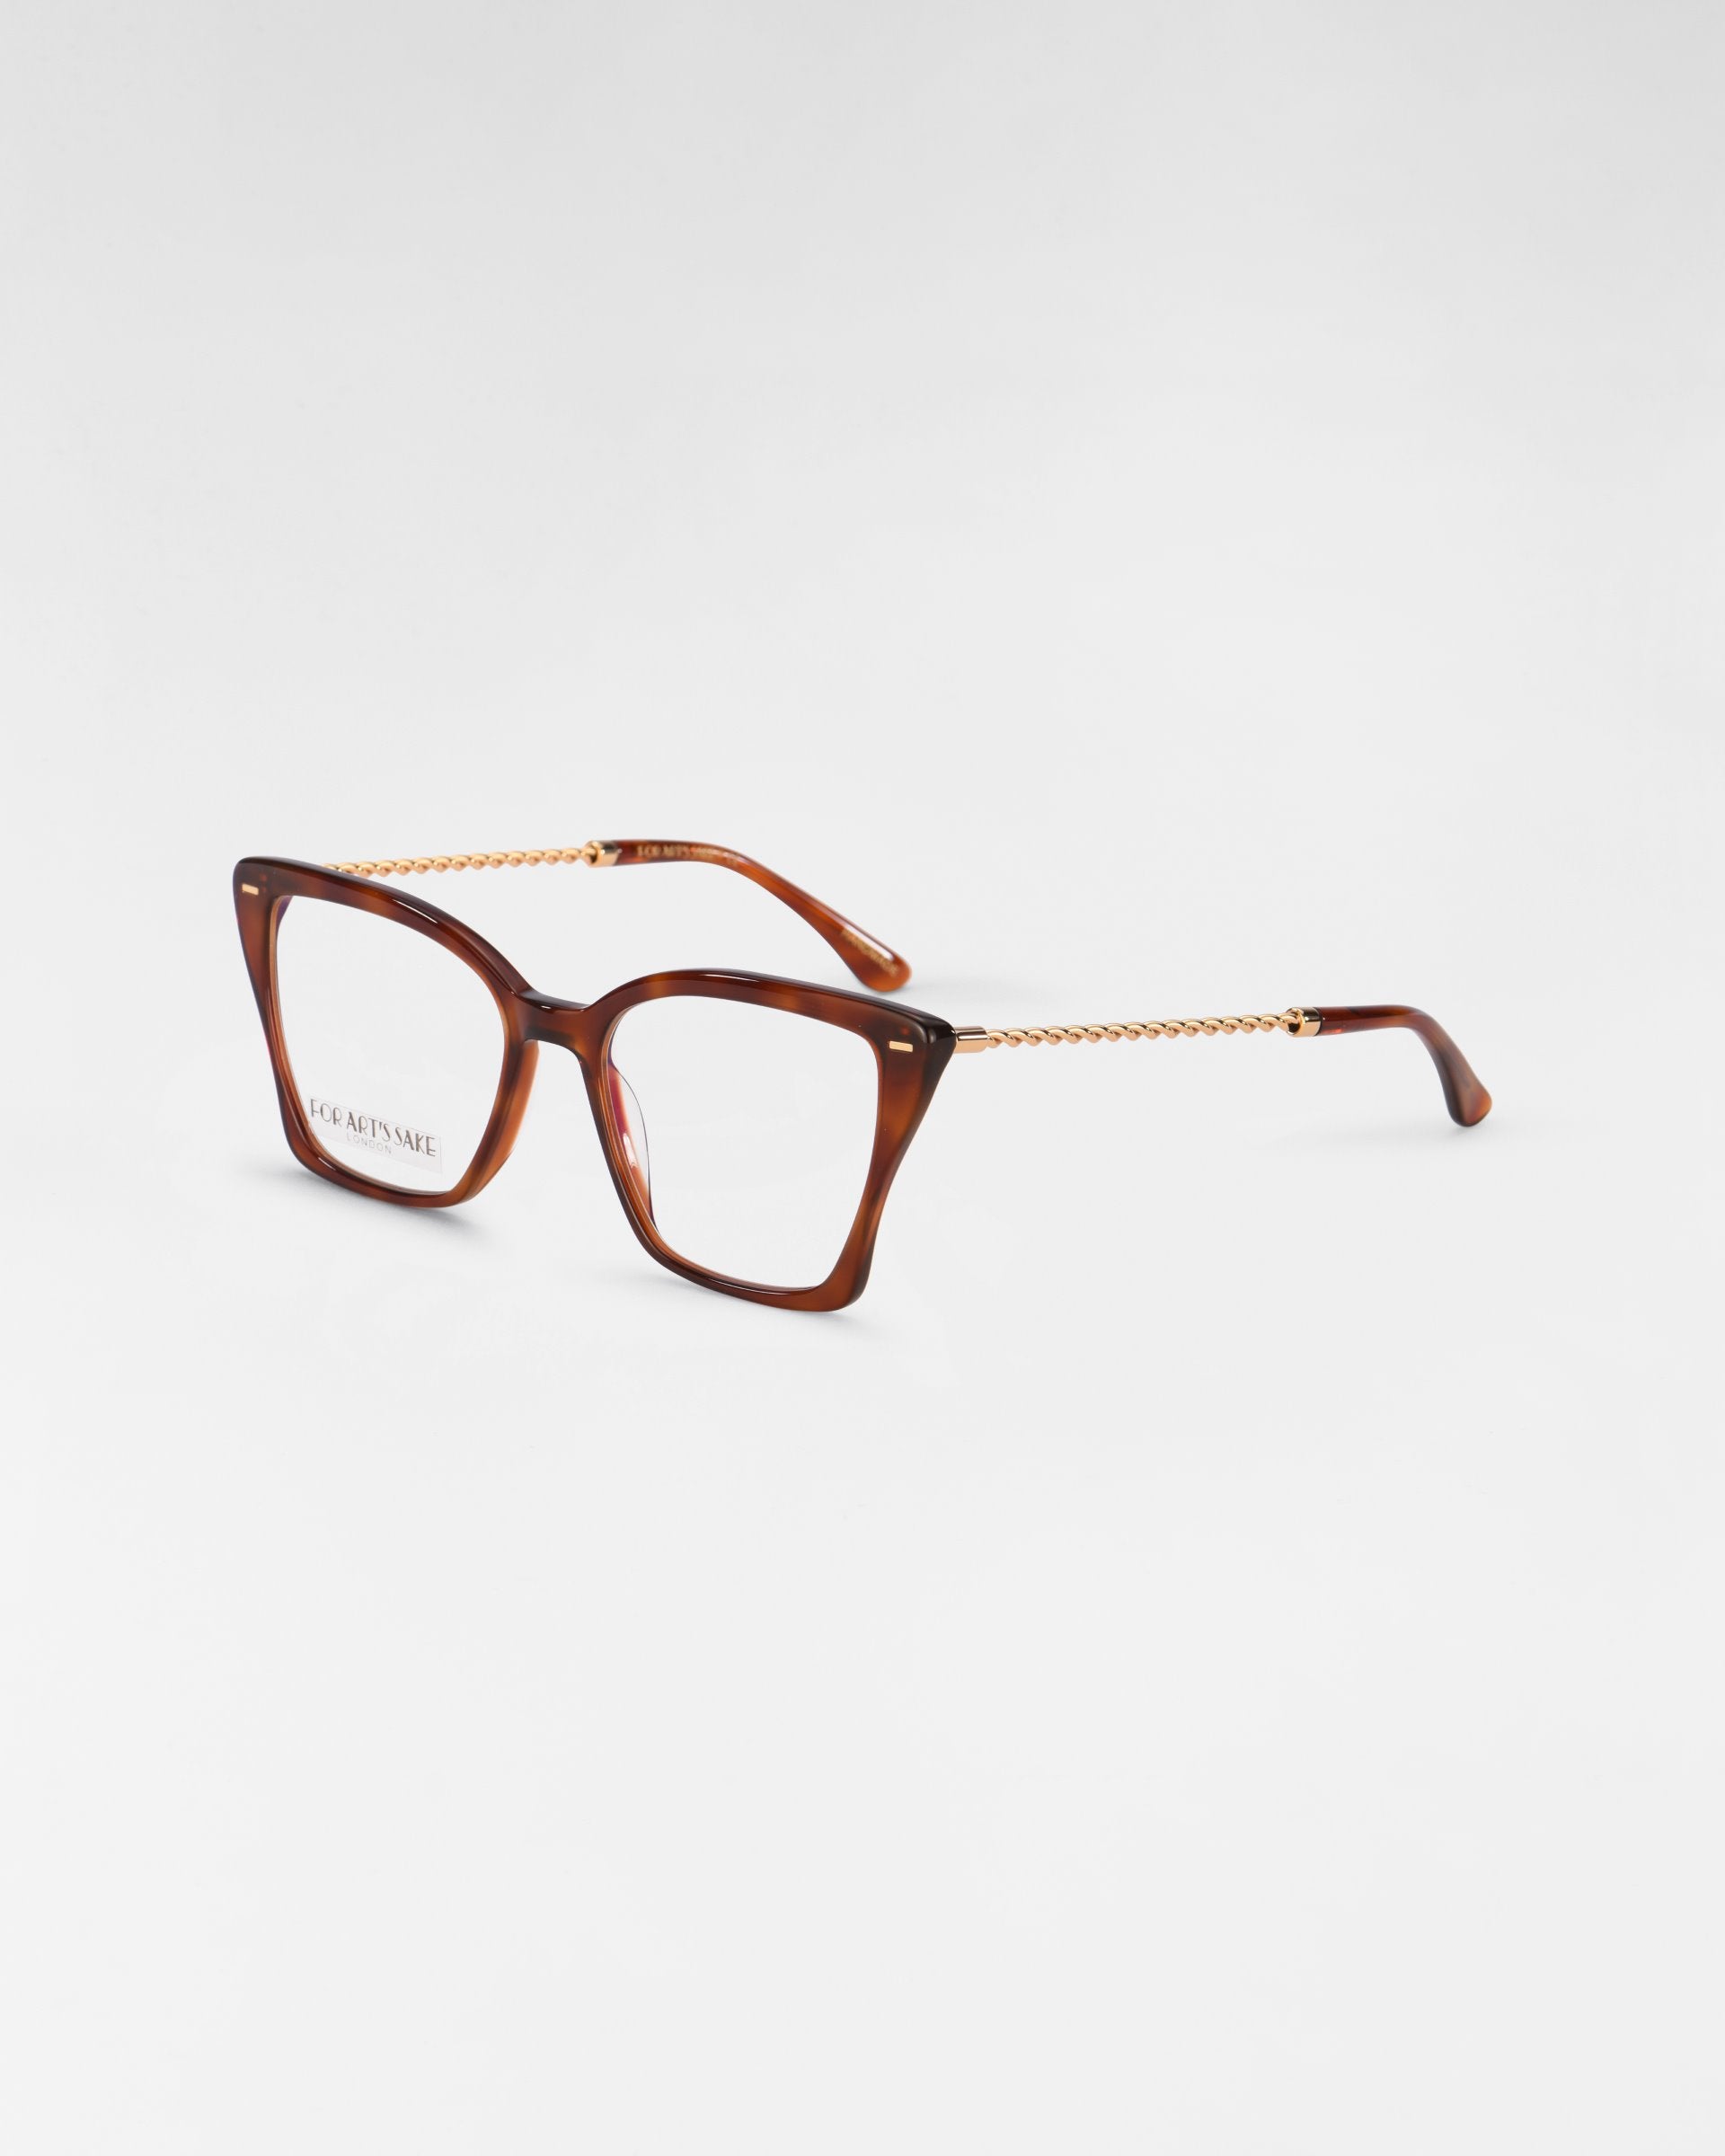 A pair of For Art&#39;s Sake® Dion eyeglasses with thick, tortoiseshell frames and gold chain arms is displayed on a plain white background. The design is stylish and modern, combining bold square lenses with UV protection and elegant, twisted gold temples.